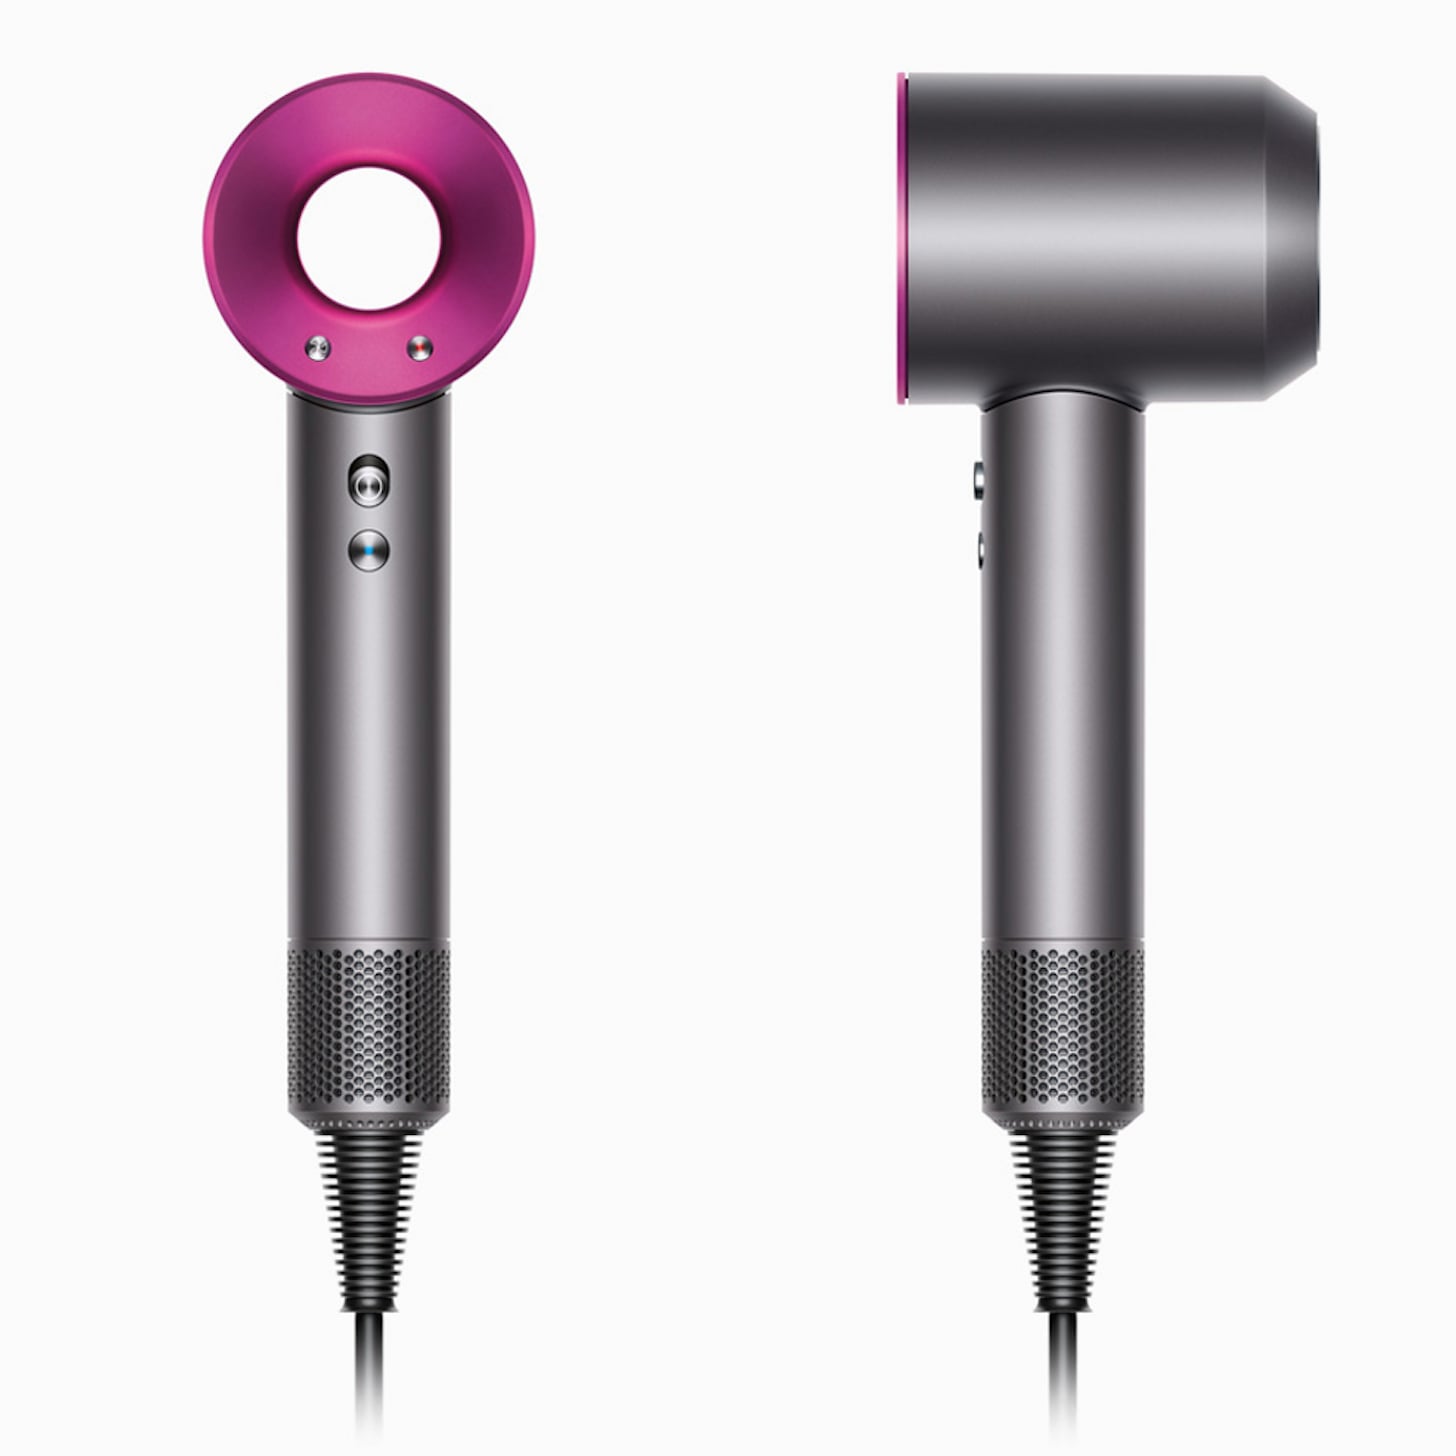 Dyson Supersonic professional hair dryer